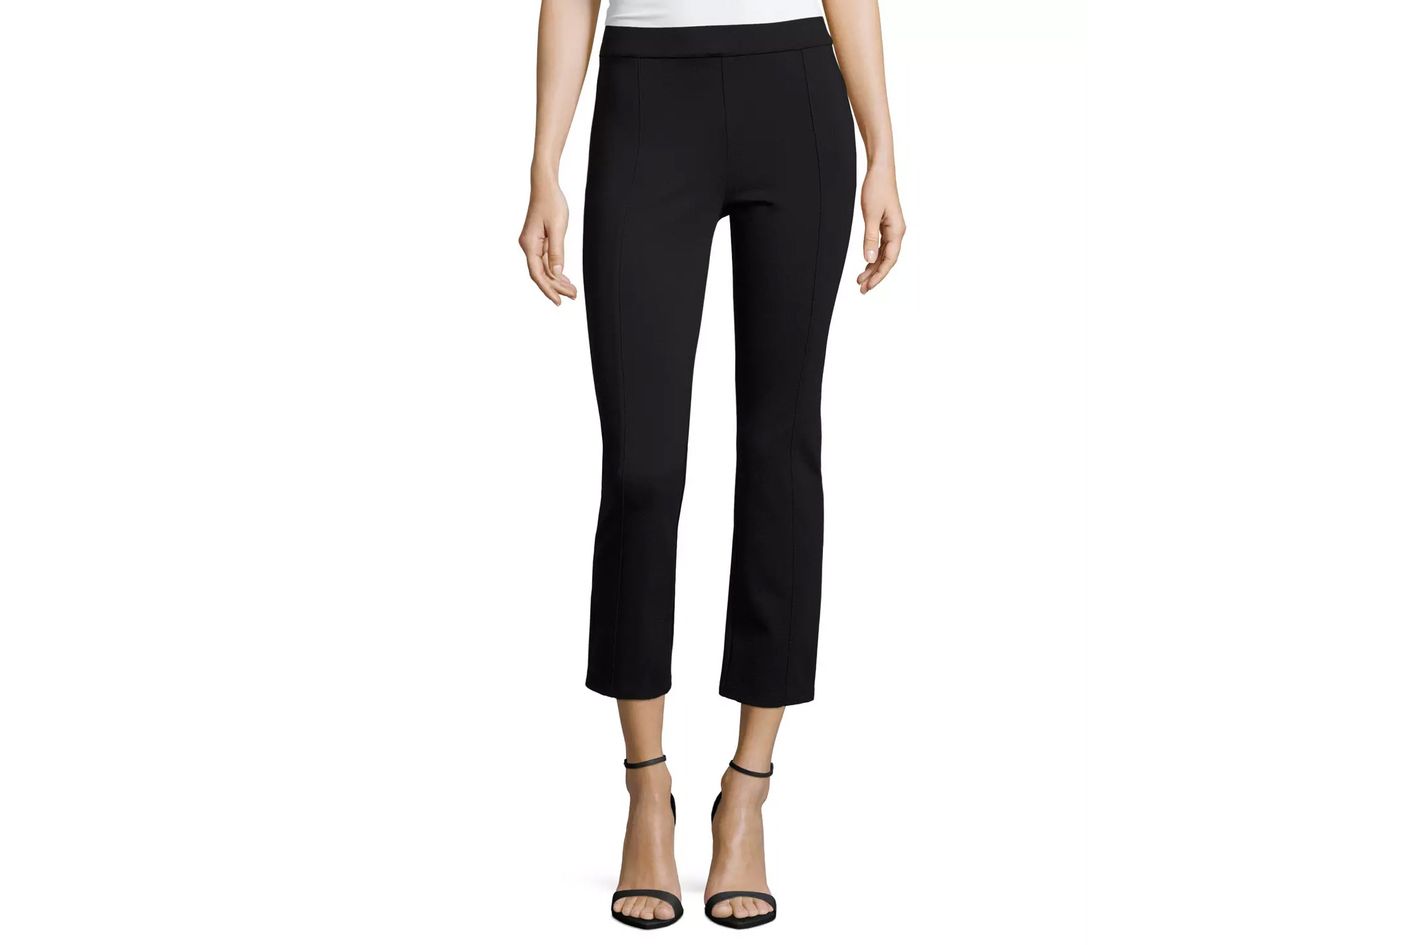 The Best Work Pants for Women Are From Avenue Montaigne